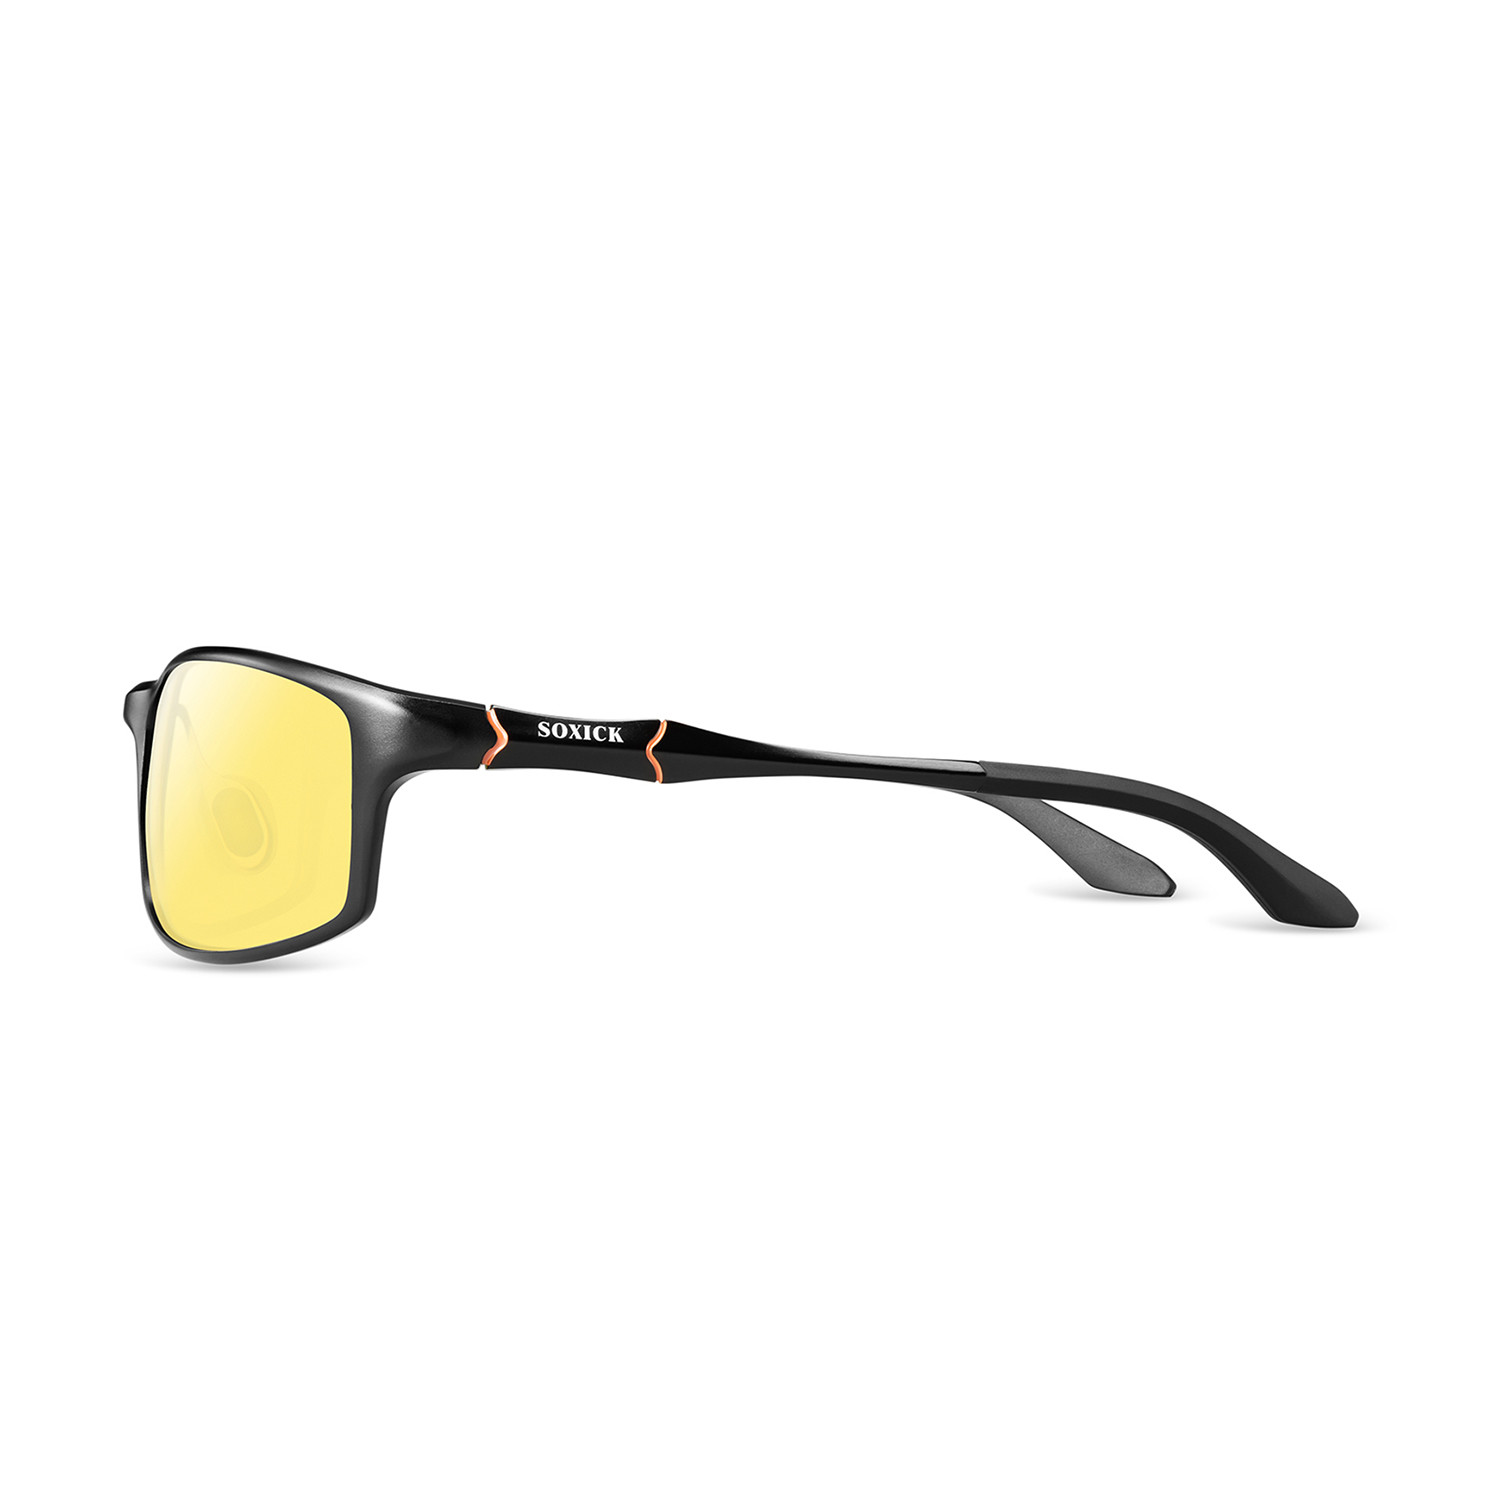 Night Vision Glasses 6128 Black Soxick Permanent Store Touch